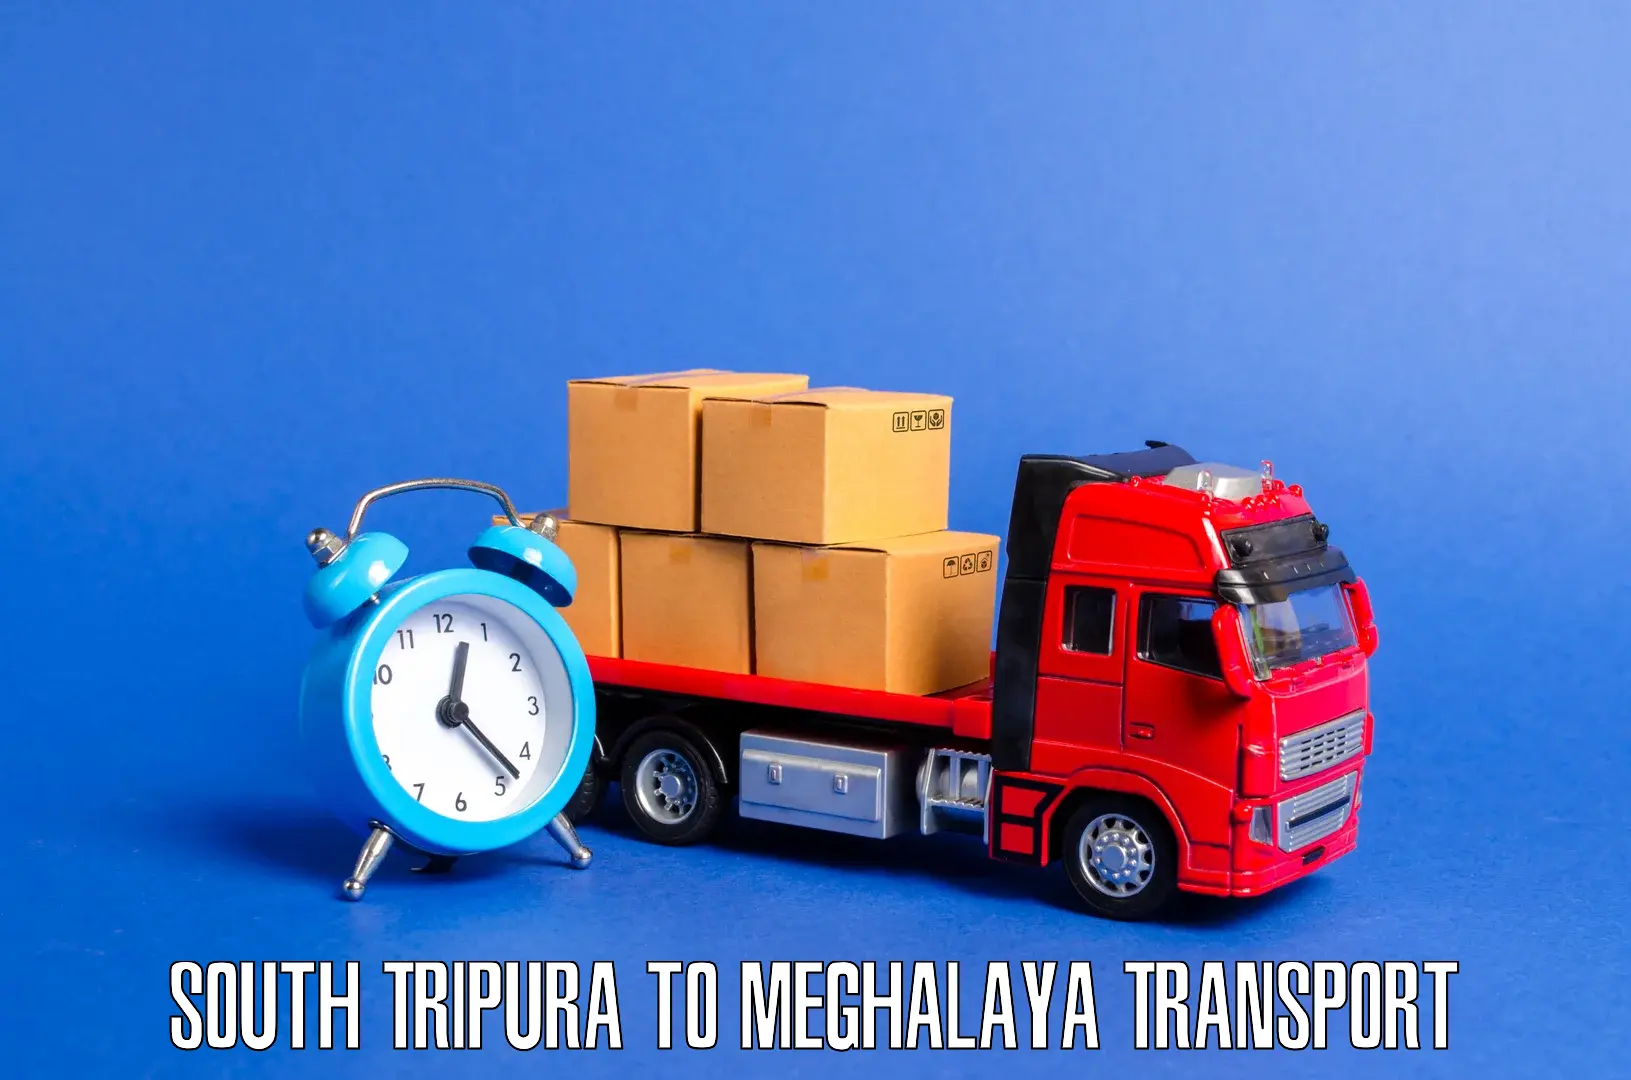 Land transport services South Tripura to Shillong